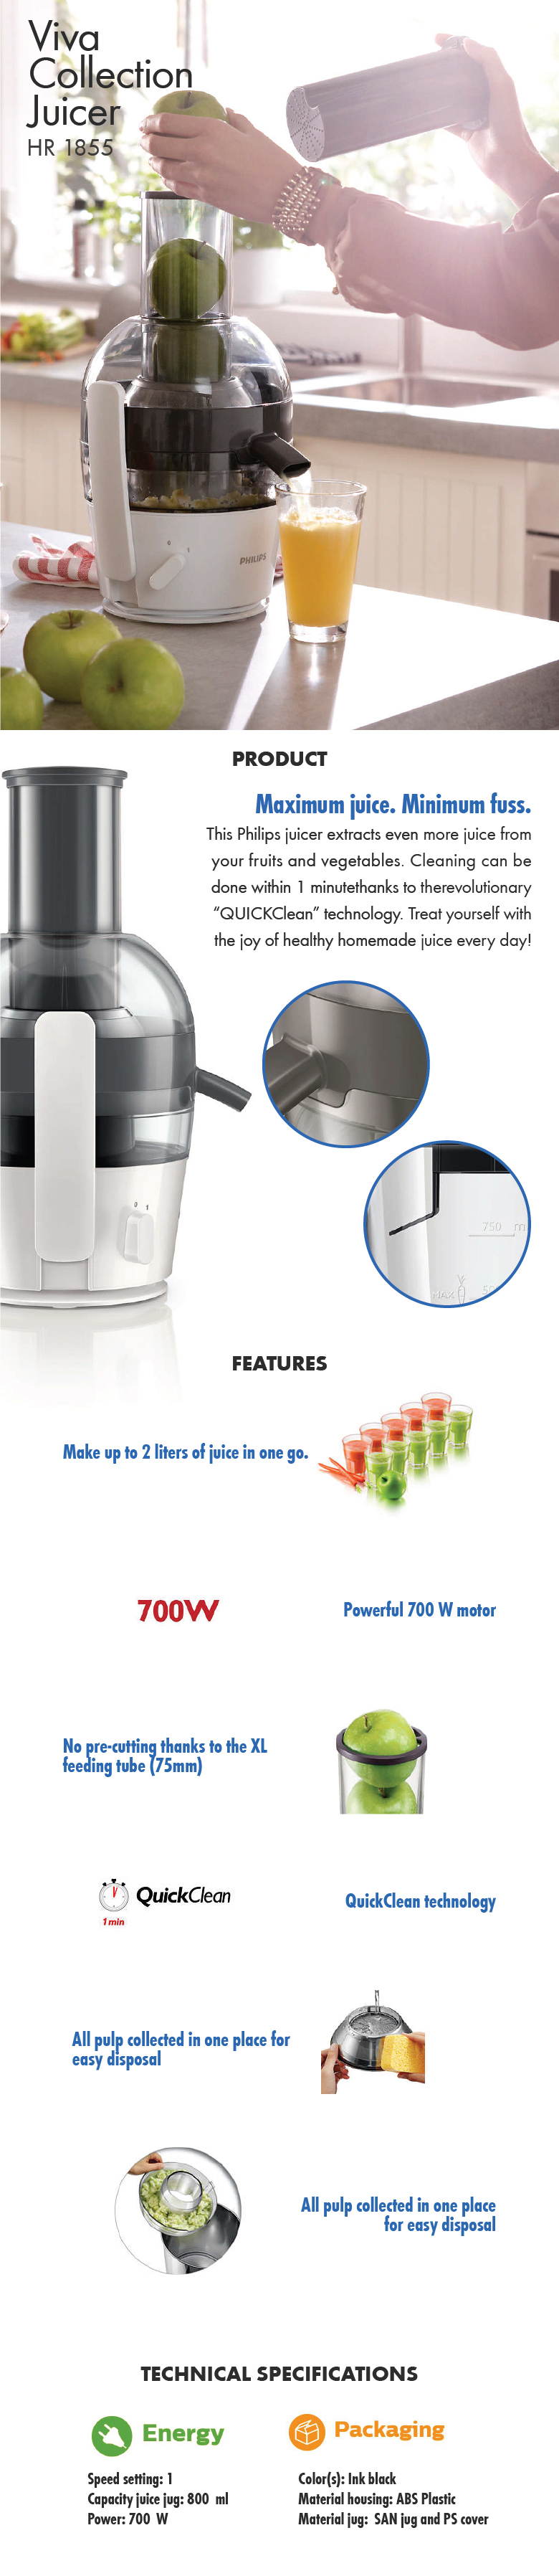 Philips HR1855 00 Viva Collection Juicer PD